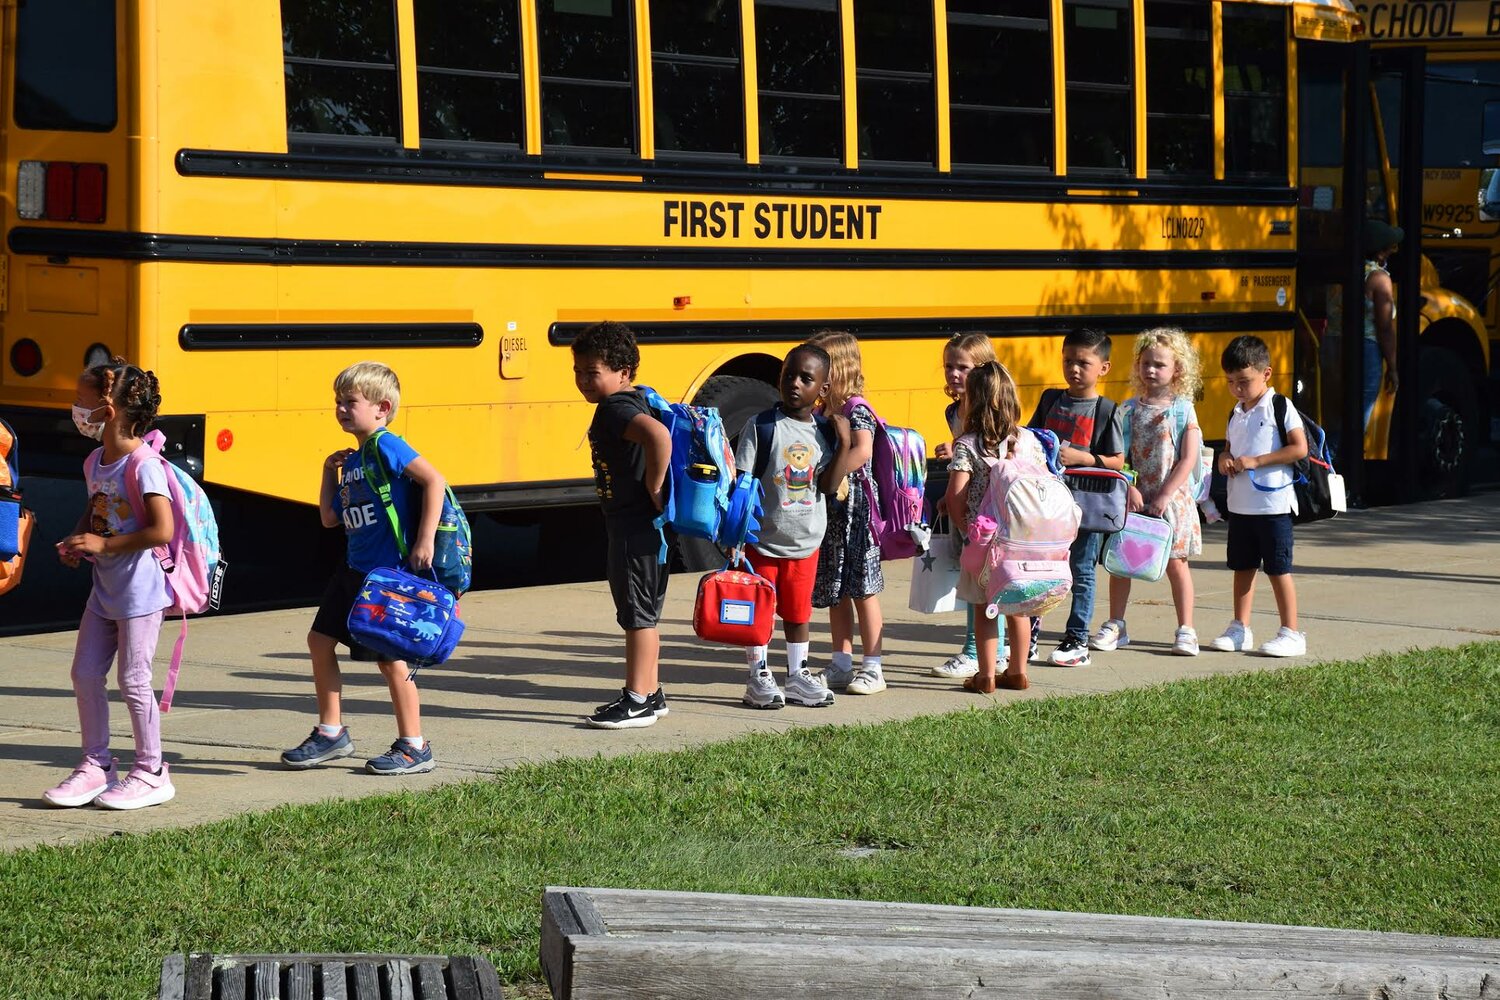 Little ones on their first day of school at John S. Hobart Elementary School.